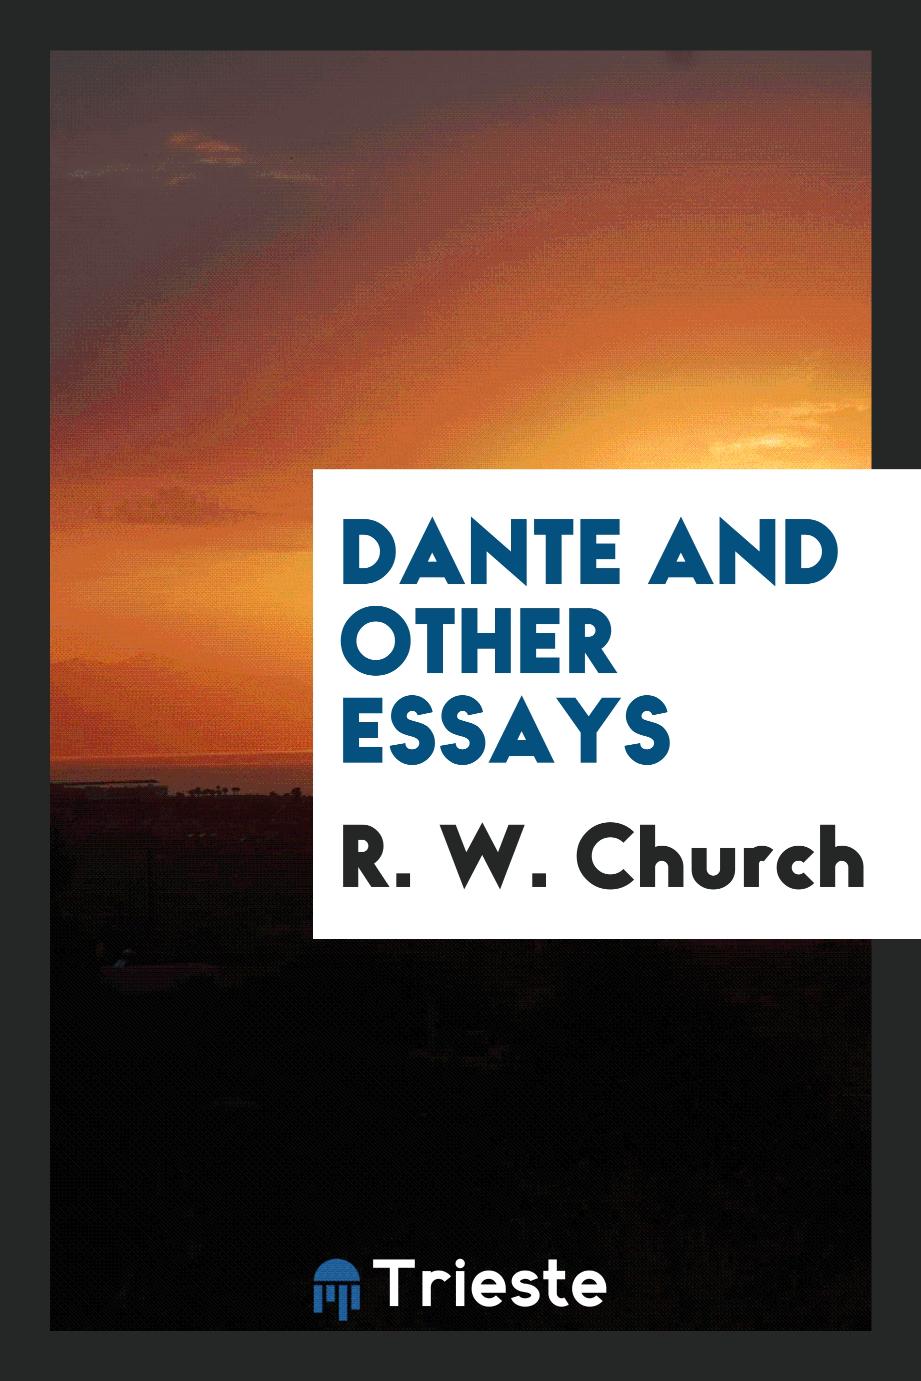 Dante and other essays